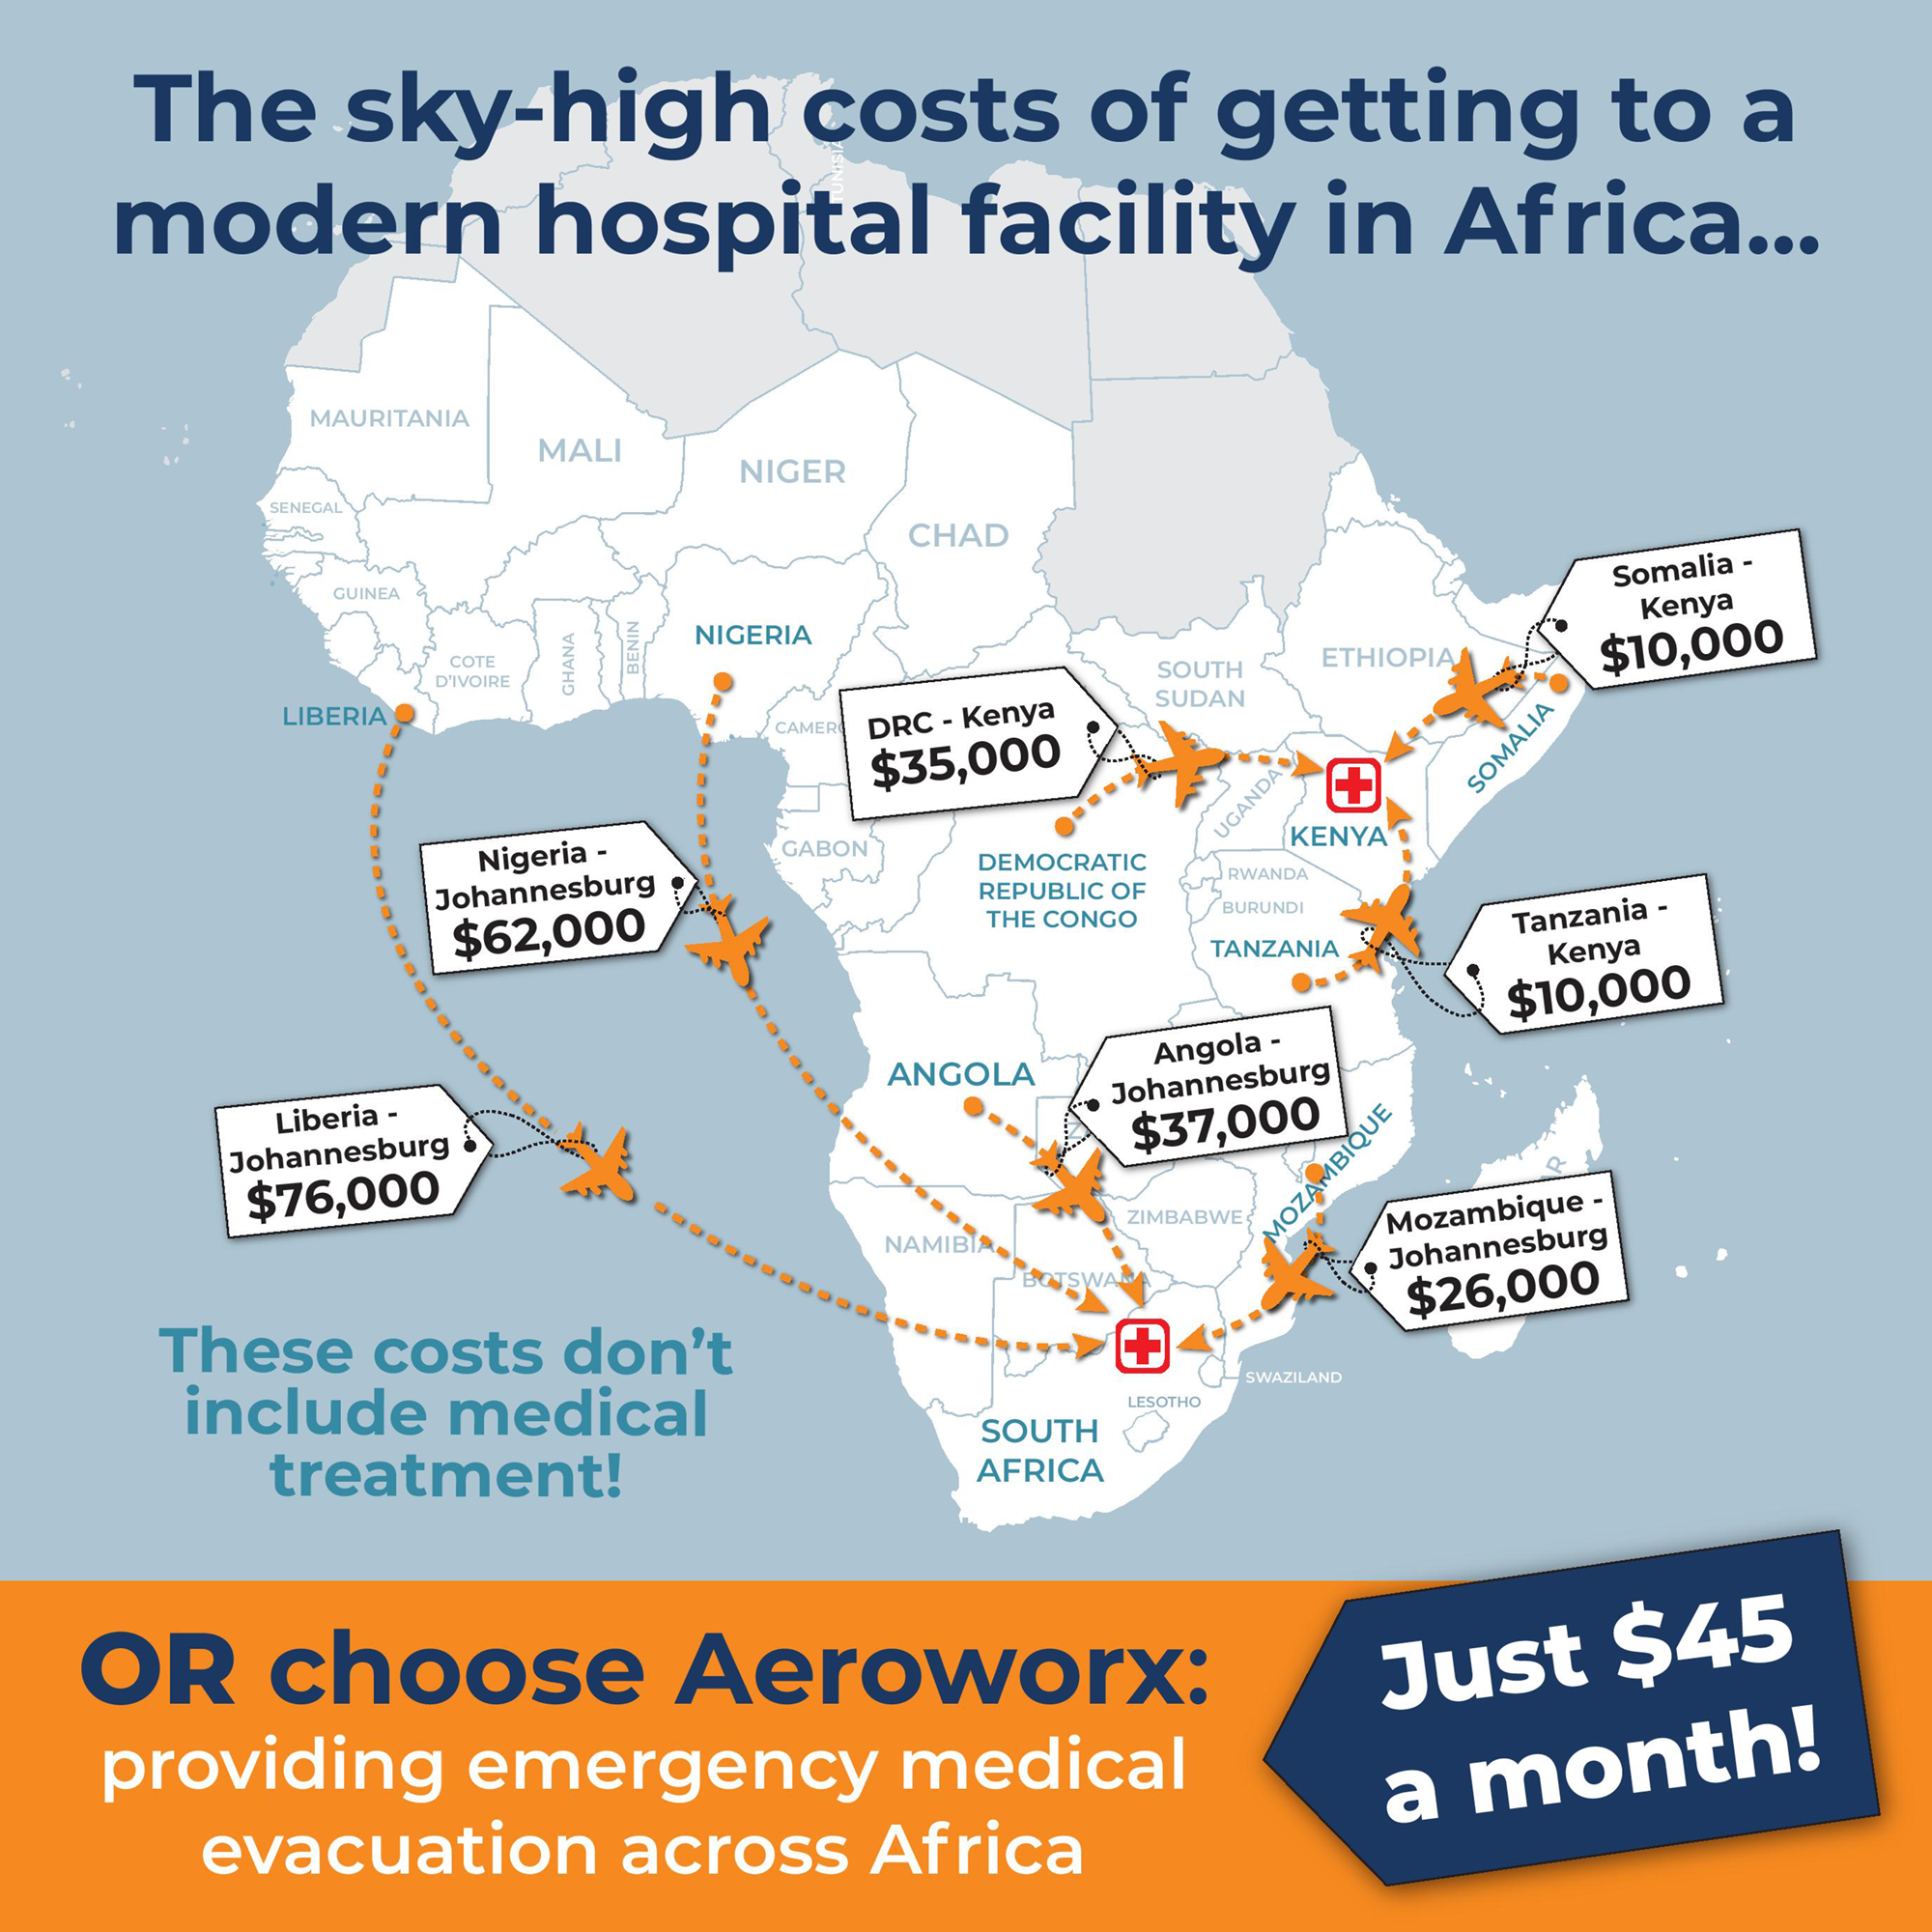 The high cost of transport in a medical emergency